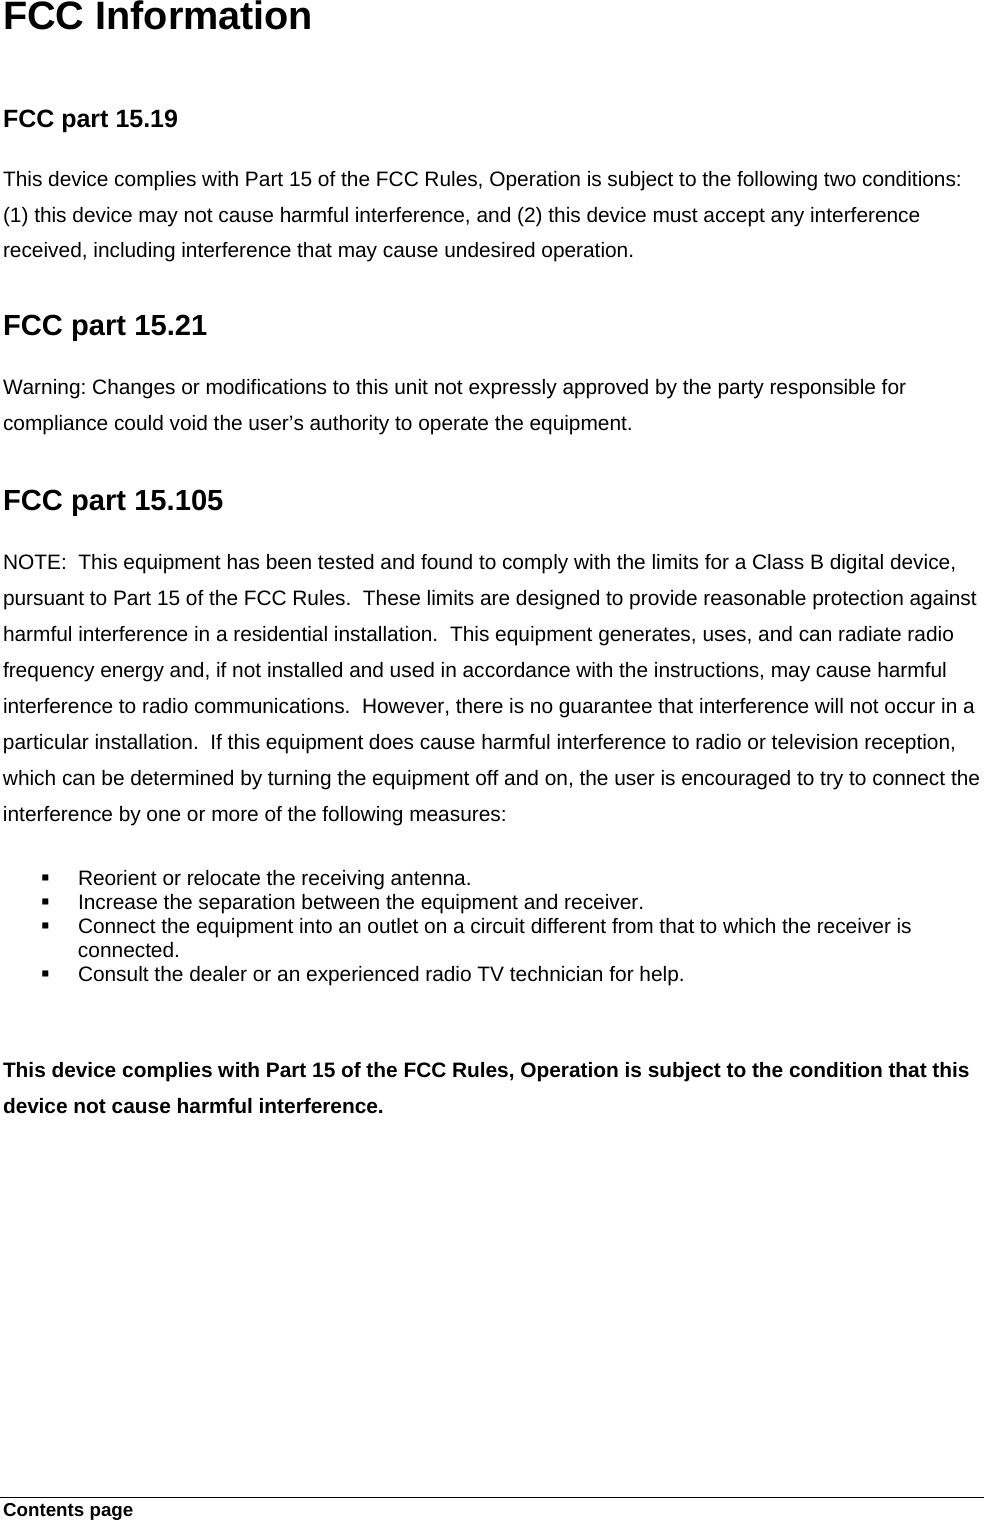 Contents page   FCC Information   FCC part 15.19  This device complies with Part 15 of the FCC Rules, Operation is subject to the following two conditions: (1) this device may not cause harmful interference, and (2) this device must accept any interference received, including interference that may cause undesired operation.  FCC part 15.21  Warning: Changes or modifications to this unit not expressly approved by the party responsible for compliance could void the user’s authority to operate the equipment.   FCC part 15.105  NOTE:  This equipment has been tested and found to comply with the limits for a Class B digital device, pursuant to Part 15 of the FCC Rules.  These limits are designed to provide reasonable protection against harmful interference in a residential installation.  This equipment generates, uses, and can radiate radio frequency energy and, if not installed and used in accordance with the instructions, may cause harmful interference to radio communications.  However, there is no guarantee that interference will not occur in a particular installation.  If this equipment does cause harmful interference to radio or television reception, which can be determined by turning the equipment off and on, the user is encouraged to try to connect the interference by one or more of the following measures:    Reorient or relocate the receiving antenna.   Increase the separation between the equipment and receiver.   Connect the equipment into an outlet on a circuit different from that to which the receiver is connected.   Consult the dealer or an experienced radio TV technician for help.    This device complies with Part 15 of the FCC Rules, Operation is subject to the condition that this device not cause harmful interference. 